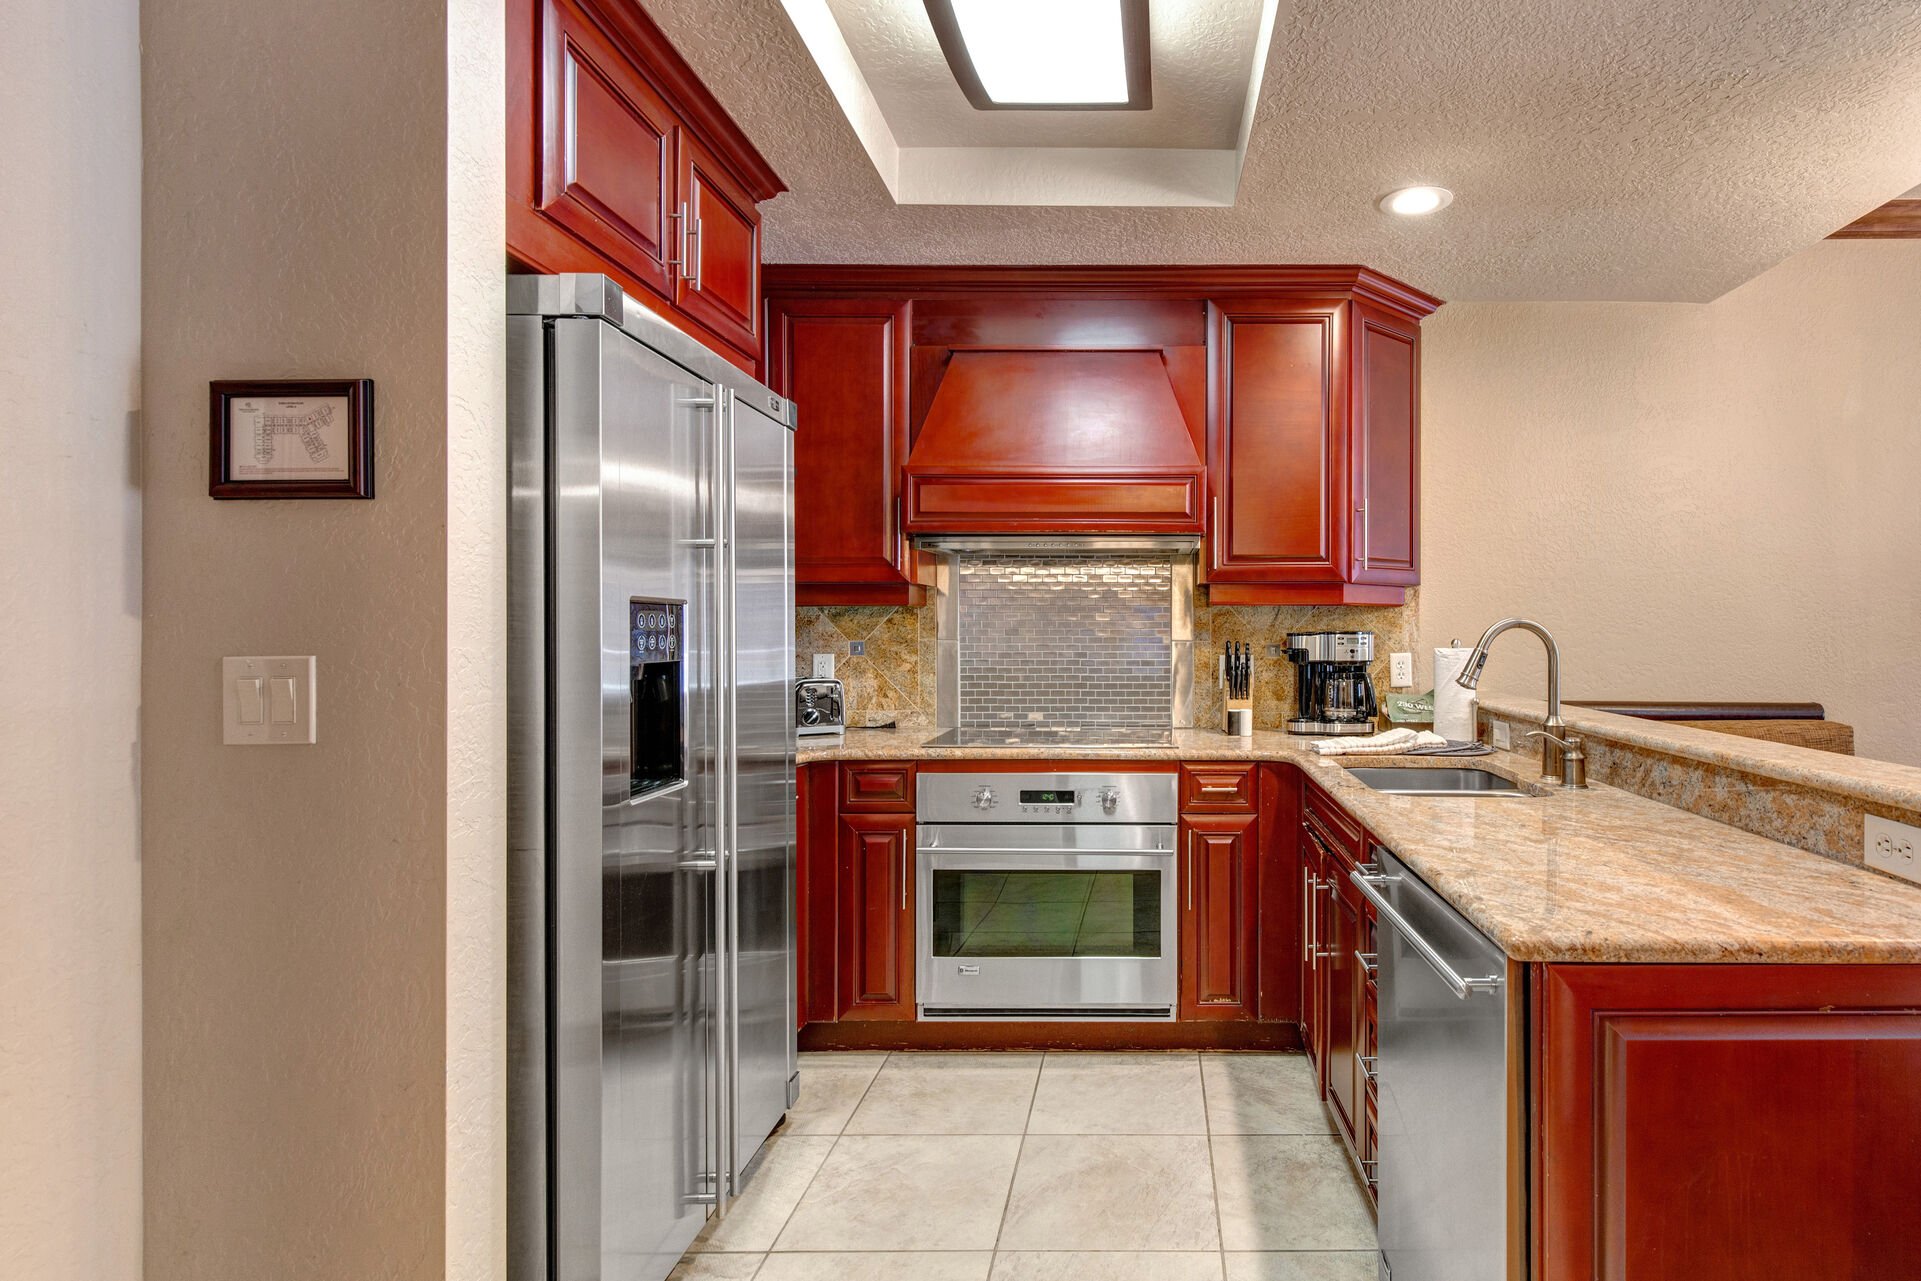 Fully Equipped Kitchen with stone countertops, stainless steel appliances, and ice maker